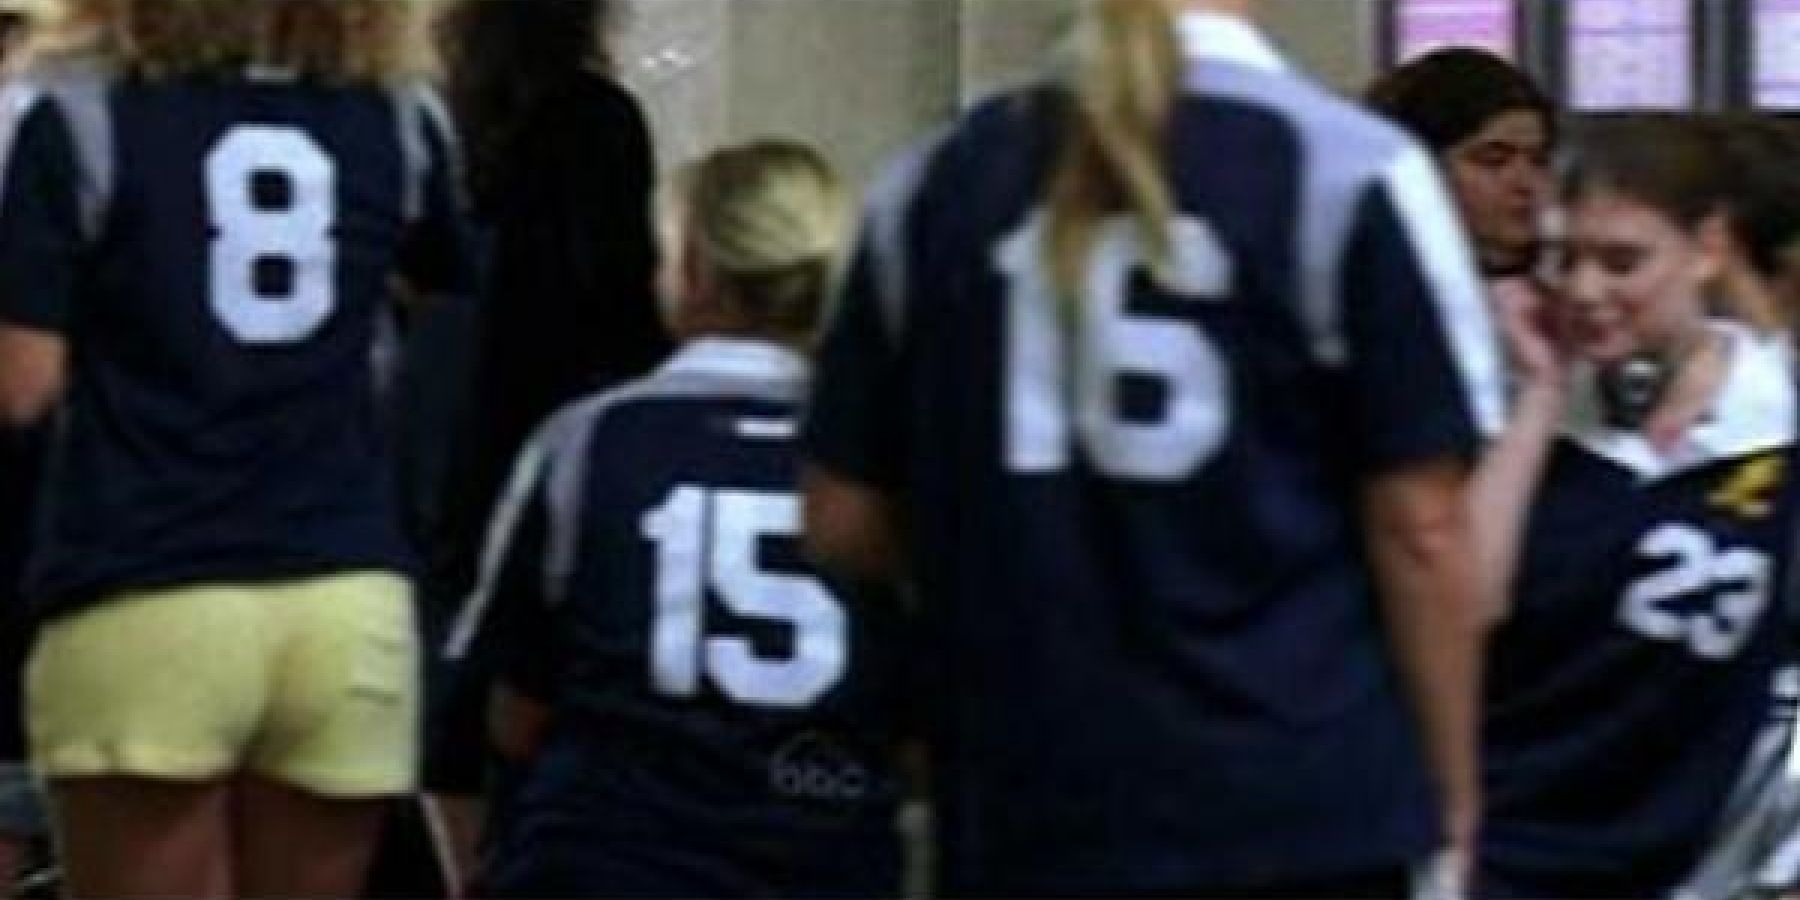 soccer jersey numbers in airport